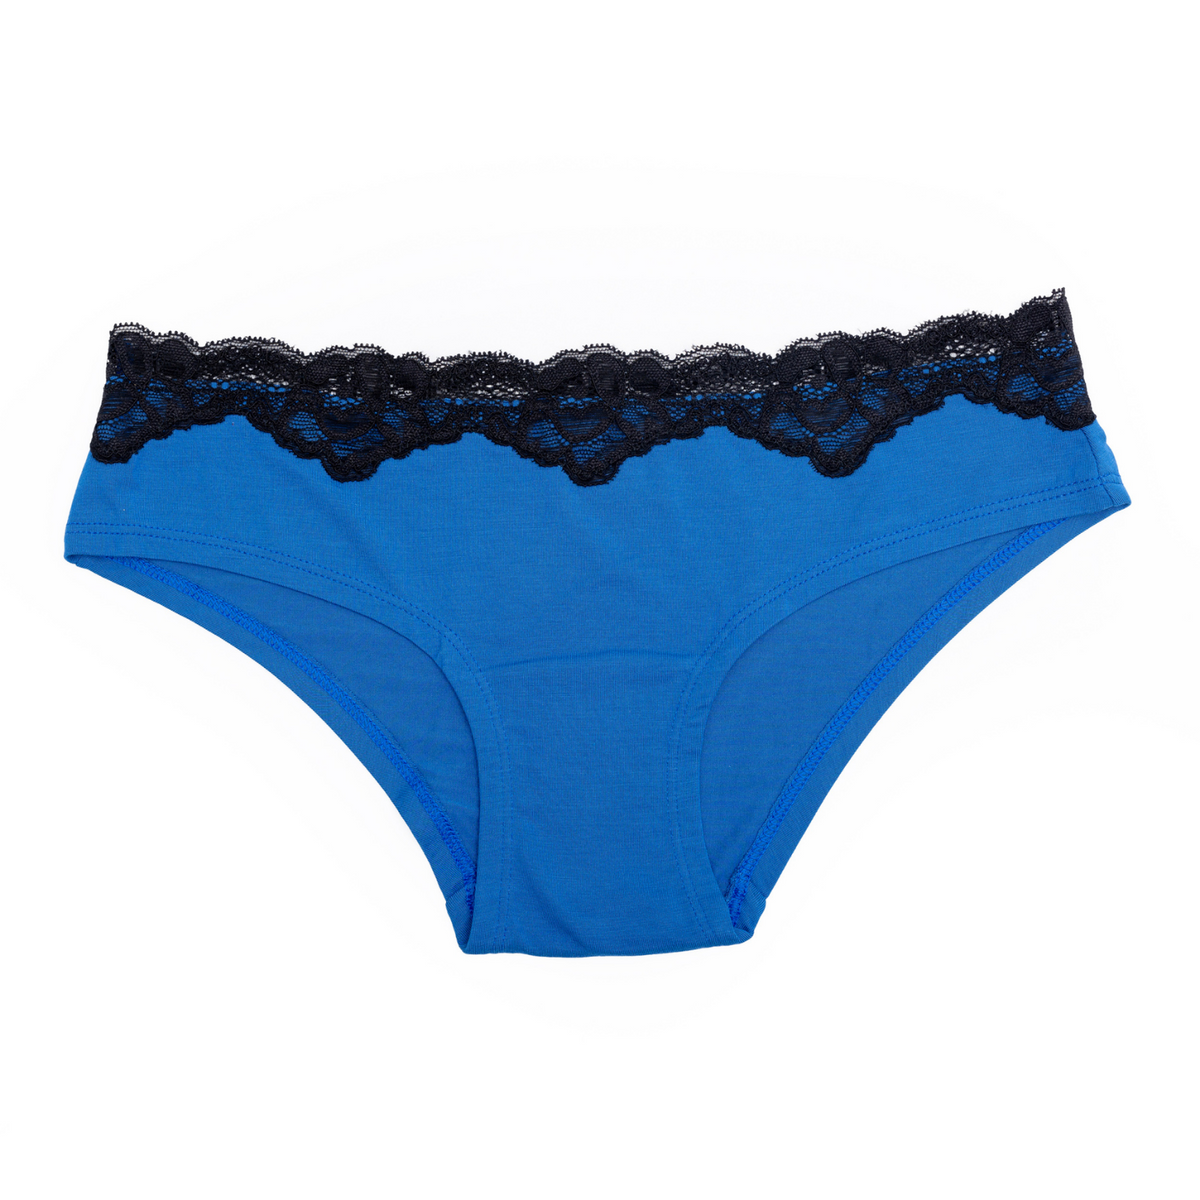 Jenna - Hipster Brief in Blue Lolite W/ Black Lace